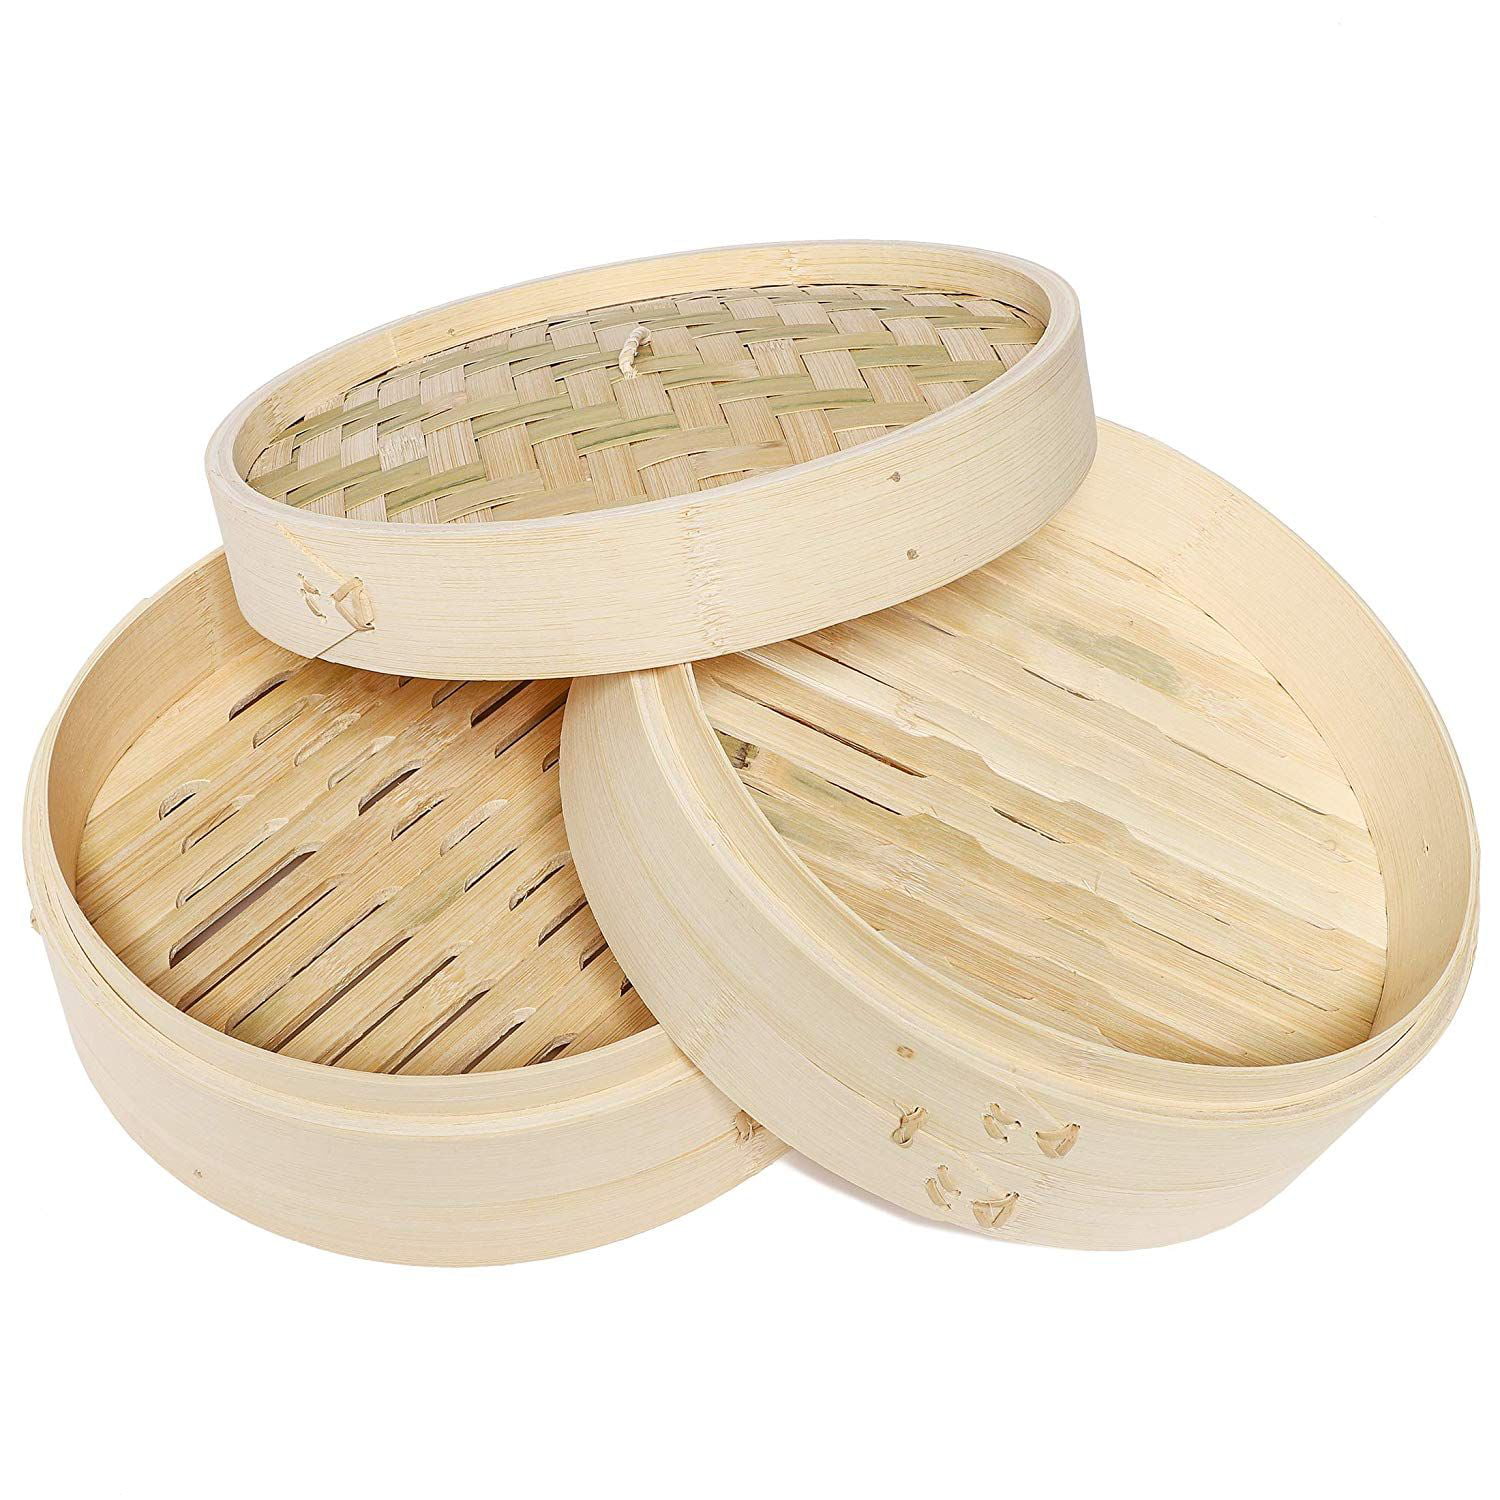 Traditional Bamboo Steamer Set 6.5" 3pcs Set With Free Steamer liner paper